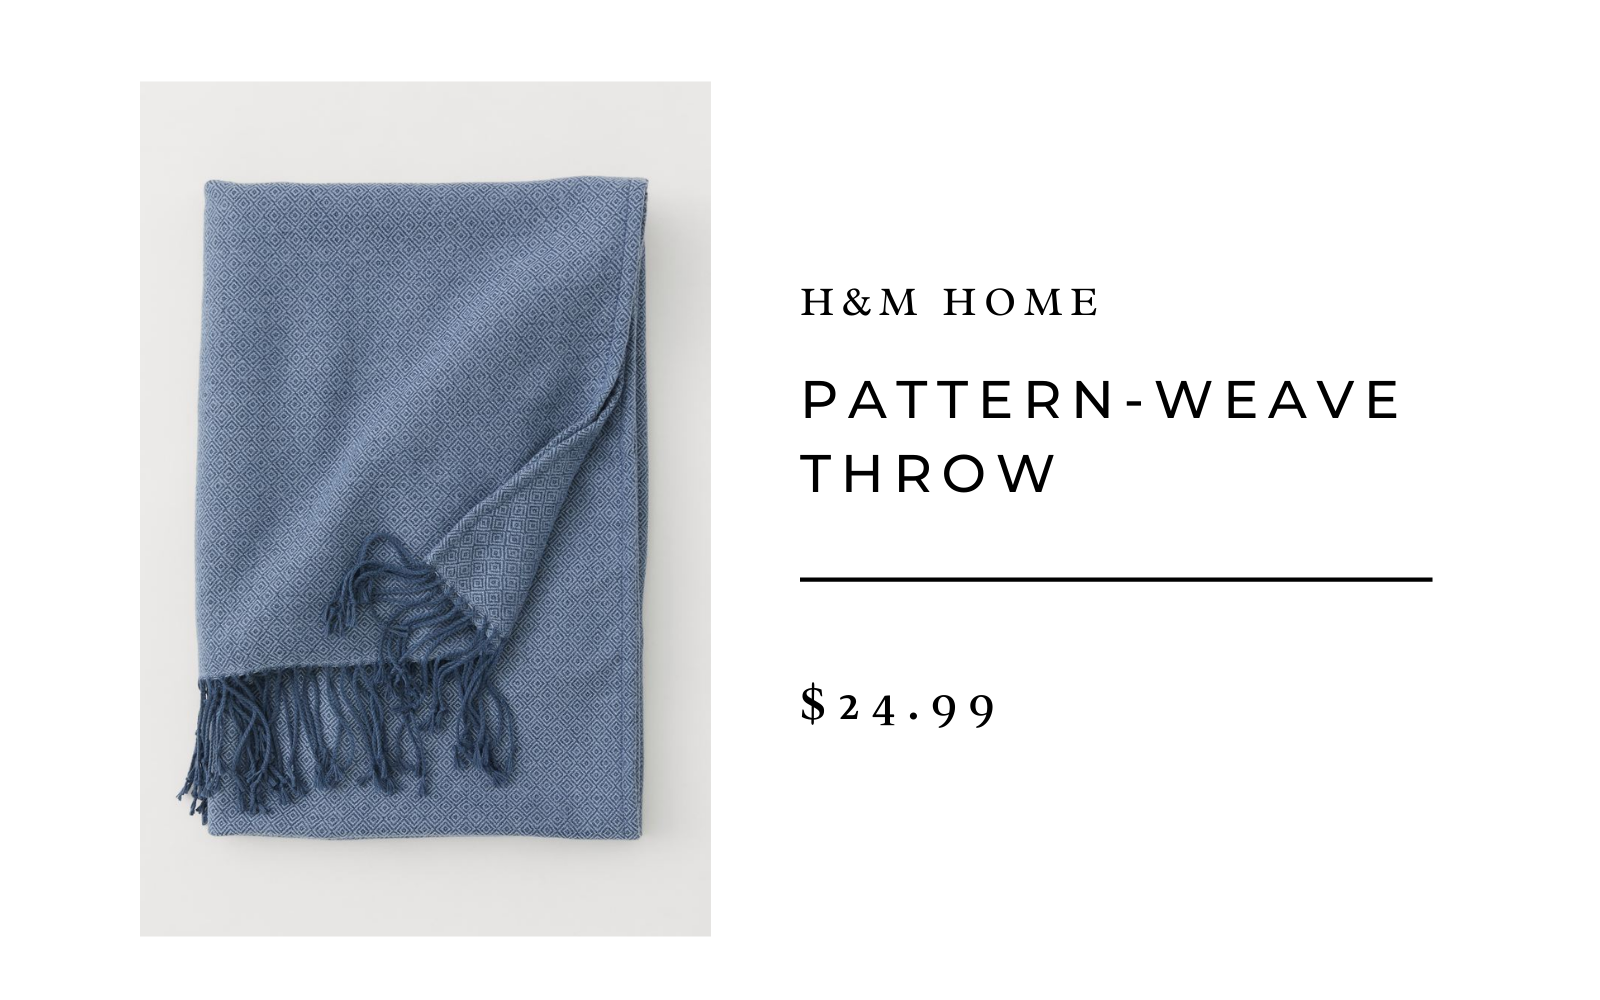 H&M Home Pattern Weave Throw